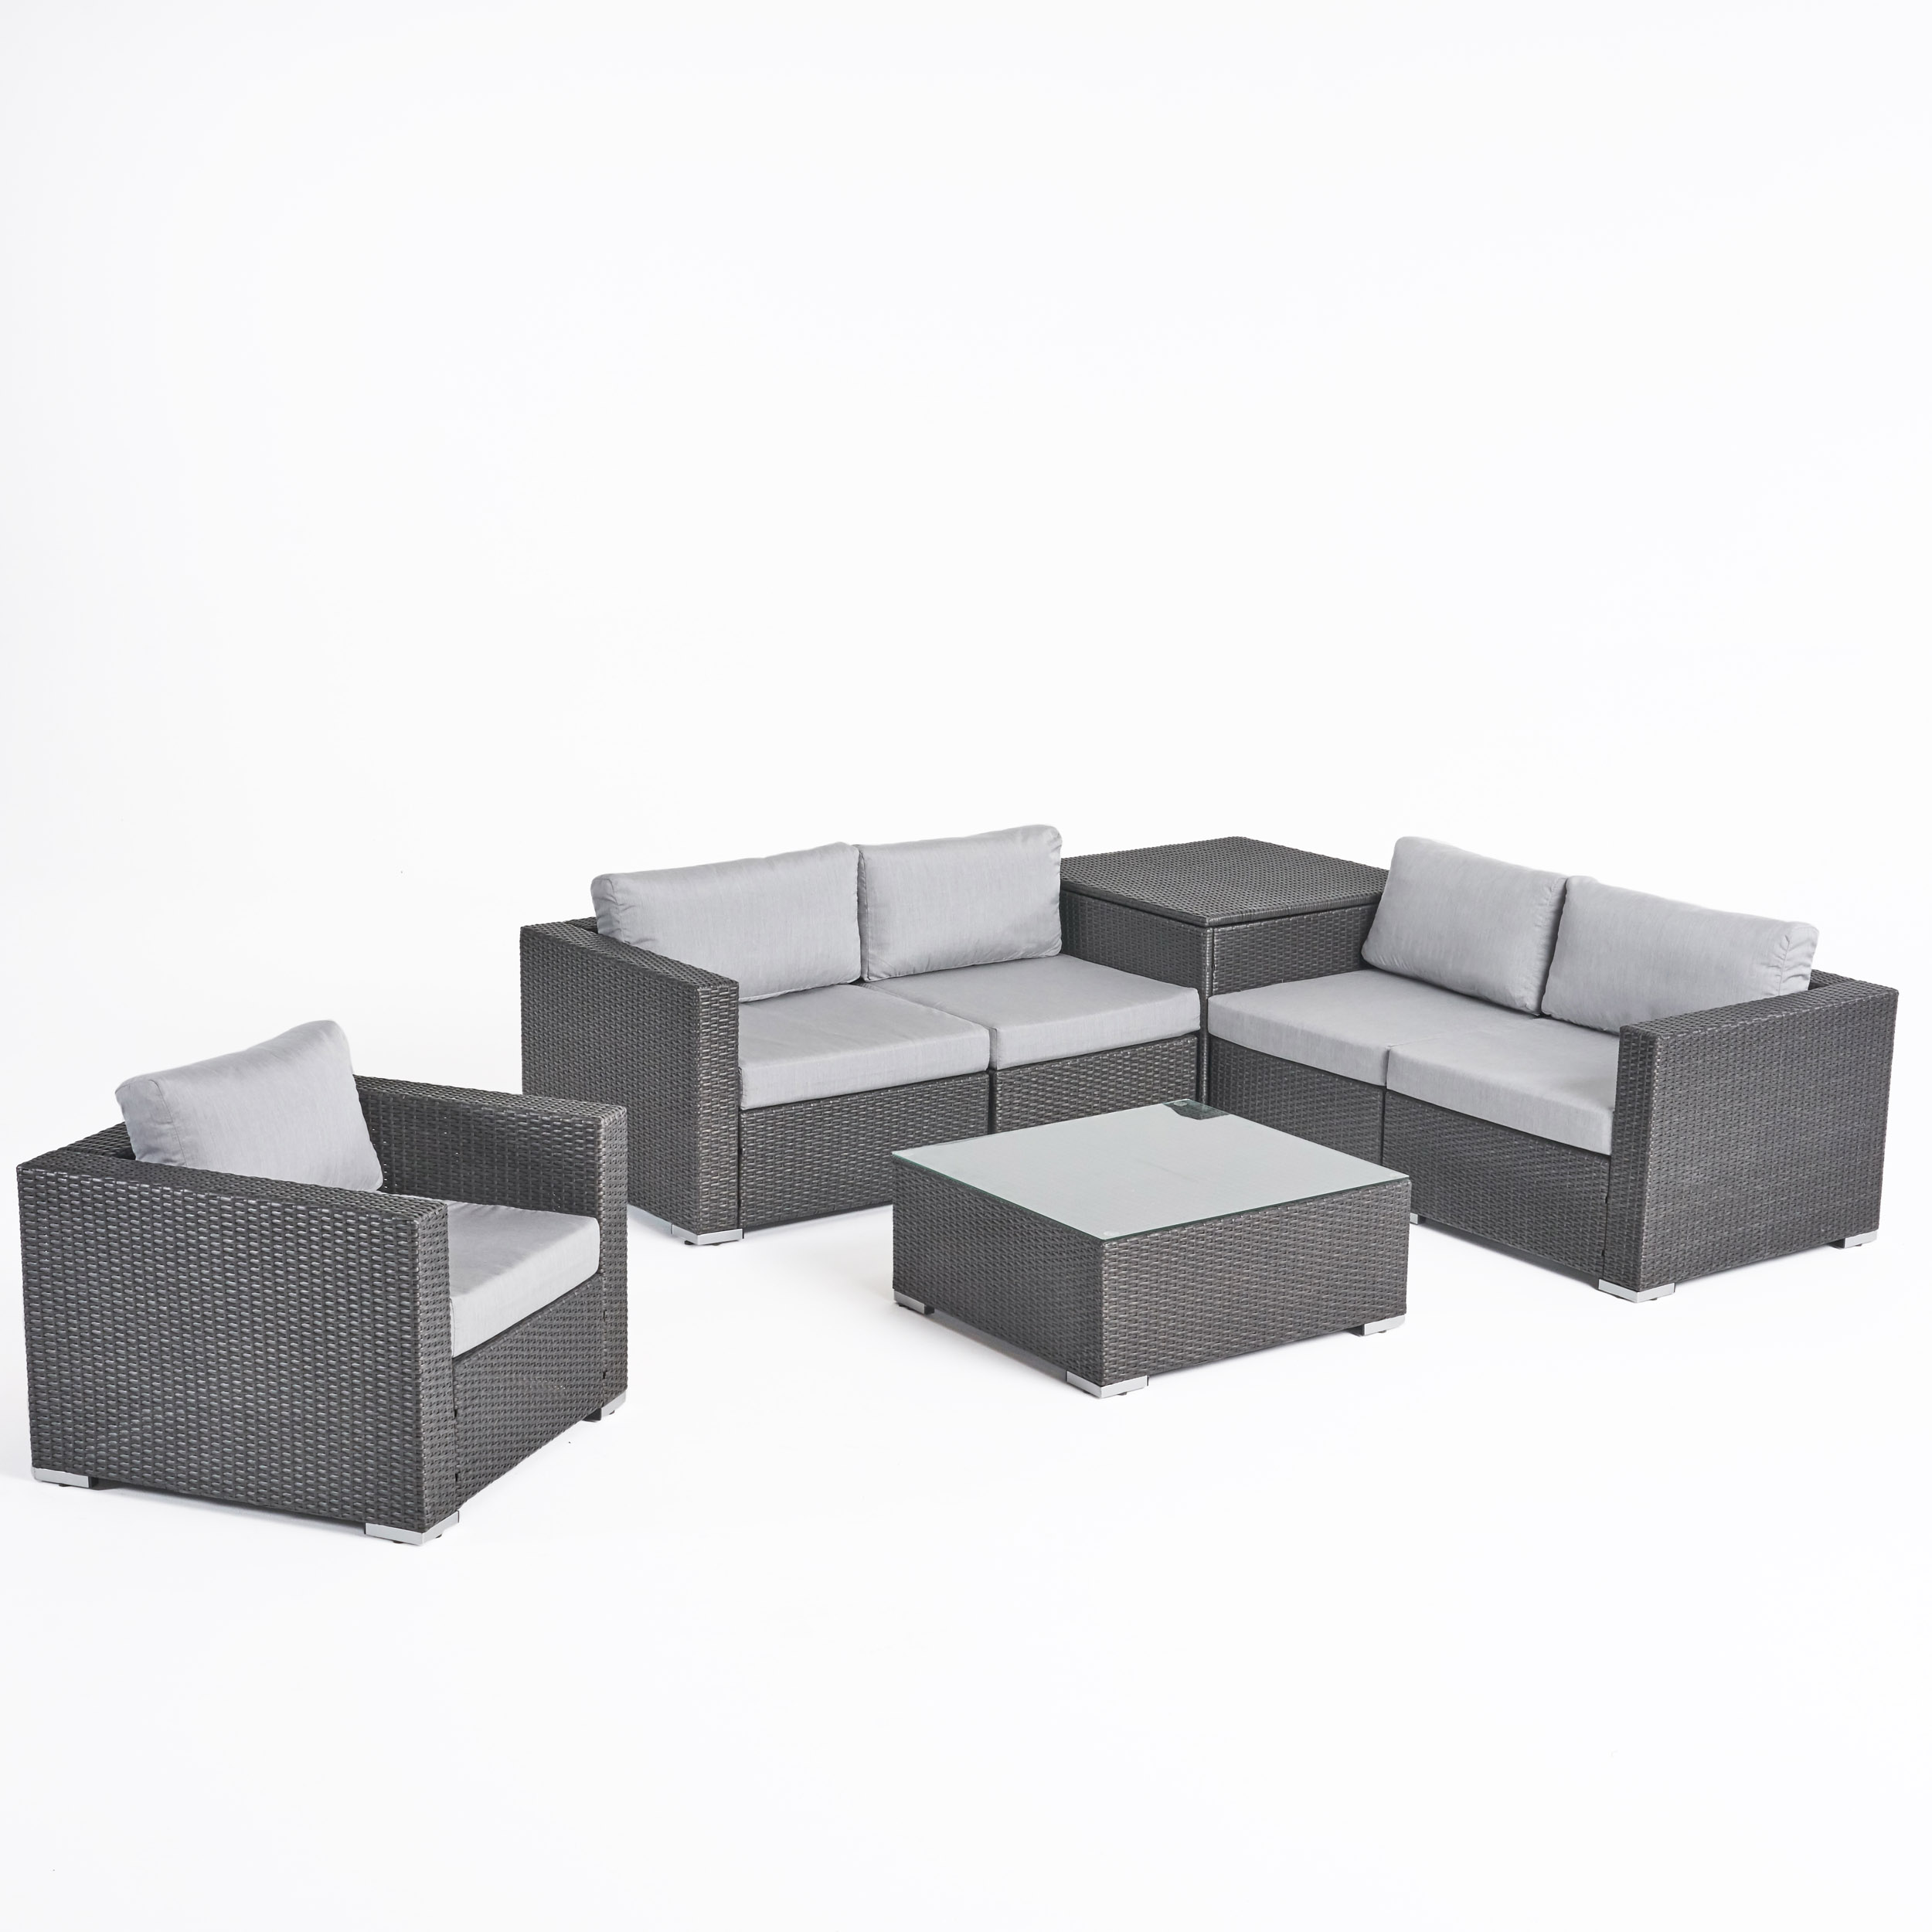 Faviola Outdoor 5 Seater Wicker Sectional Sofa Set with Storage Ottoman and Sunbrella Cushions, Gray and Sunbrella Canvas Granite - image 1 of 11